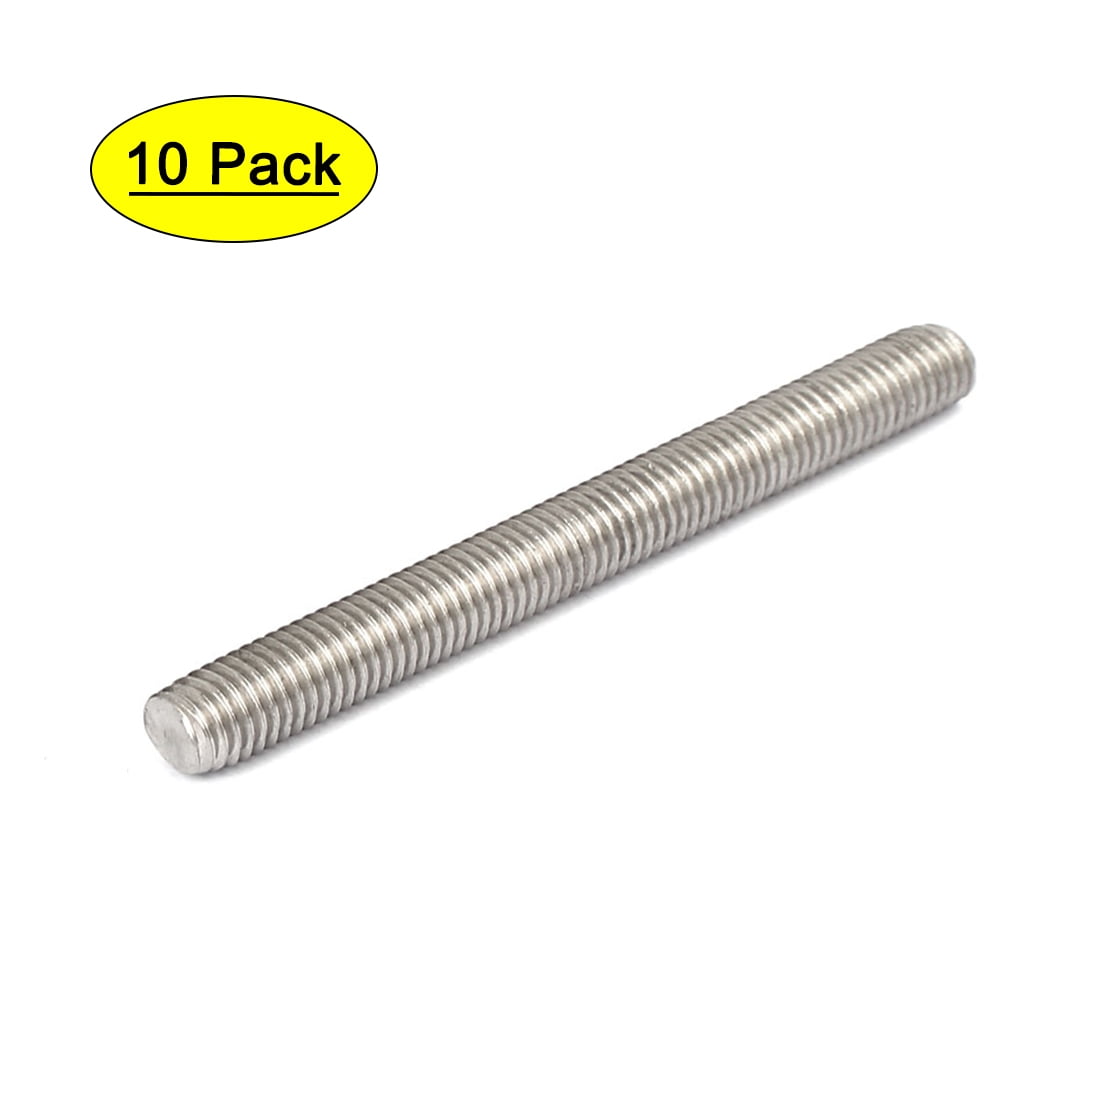 Details about   10mm x 100mm All Thread Threaded Rod Bar Grade #304 Stainless Steel Qty 1 Piece 